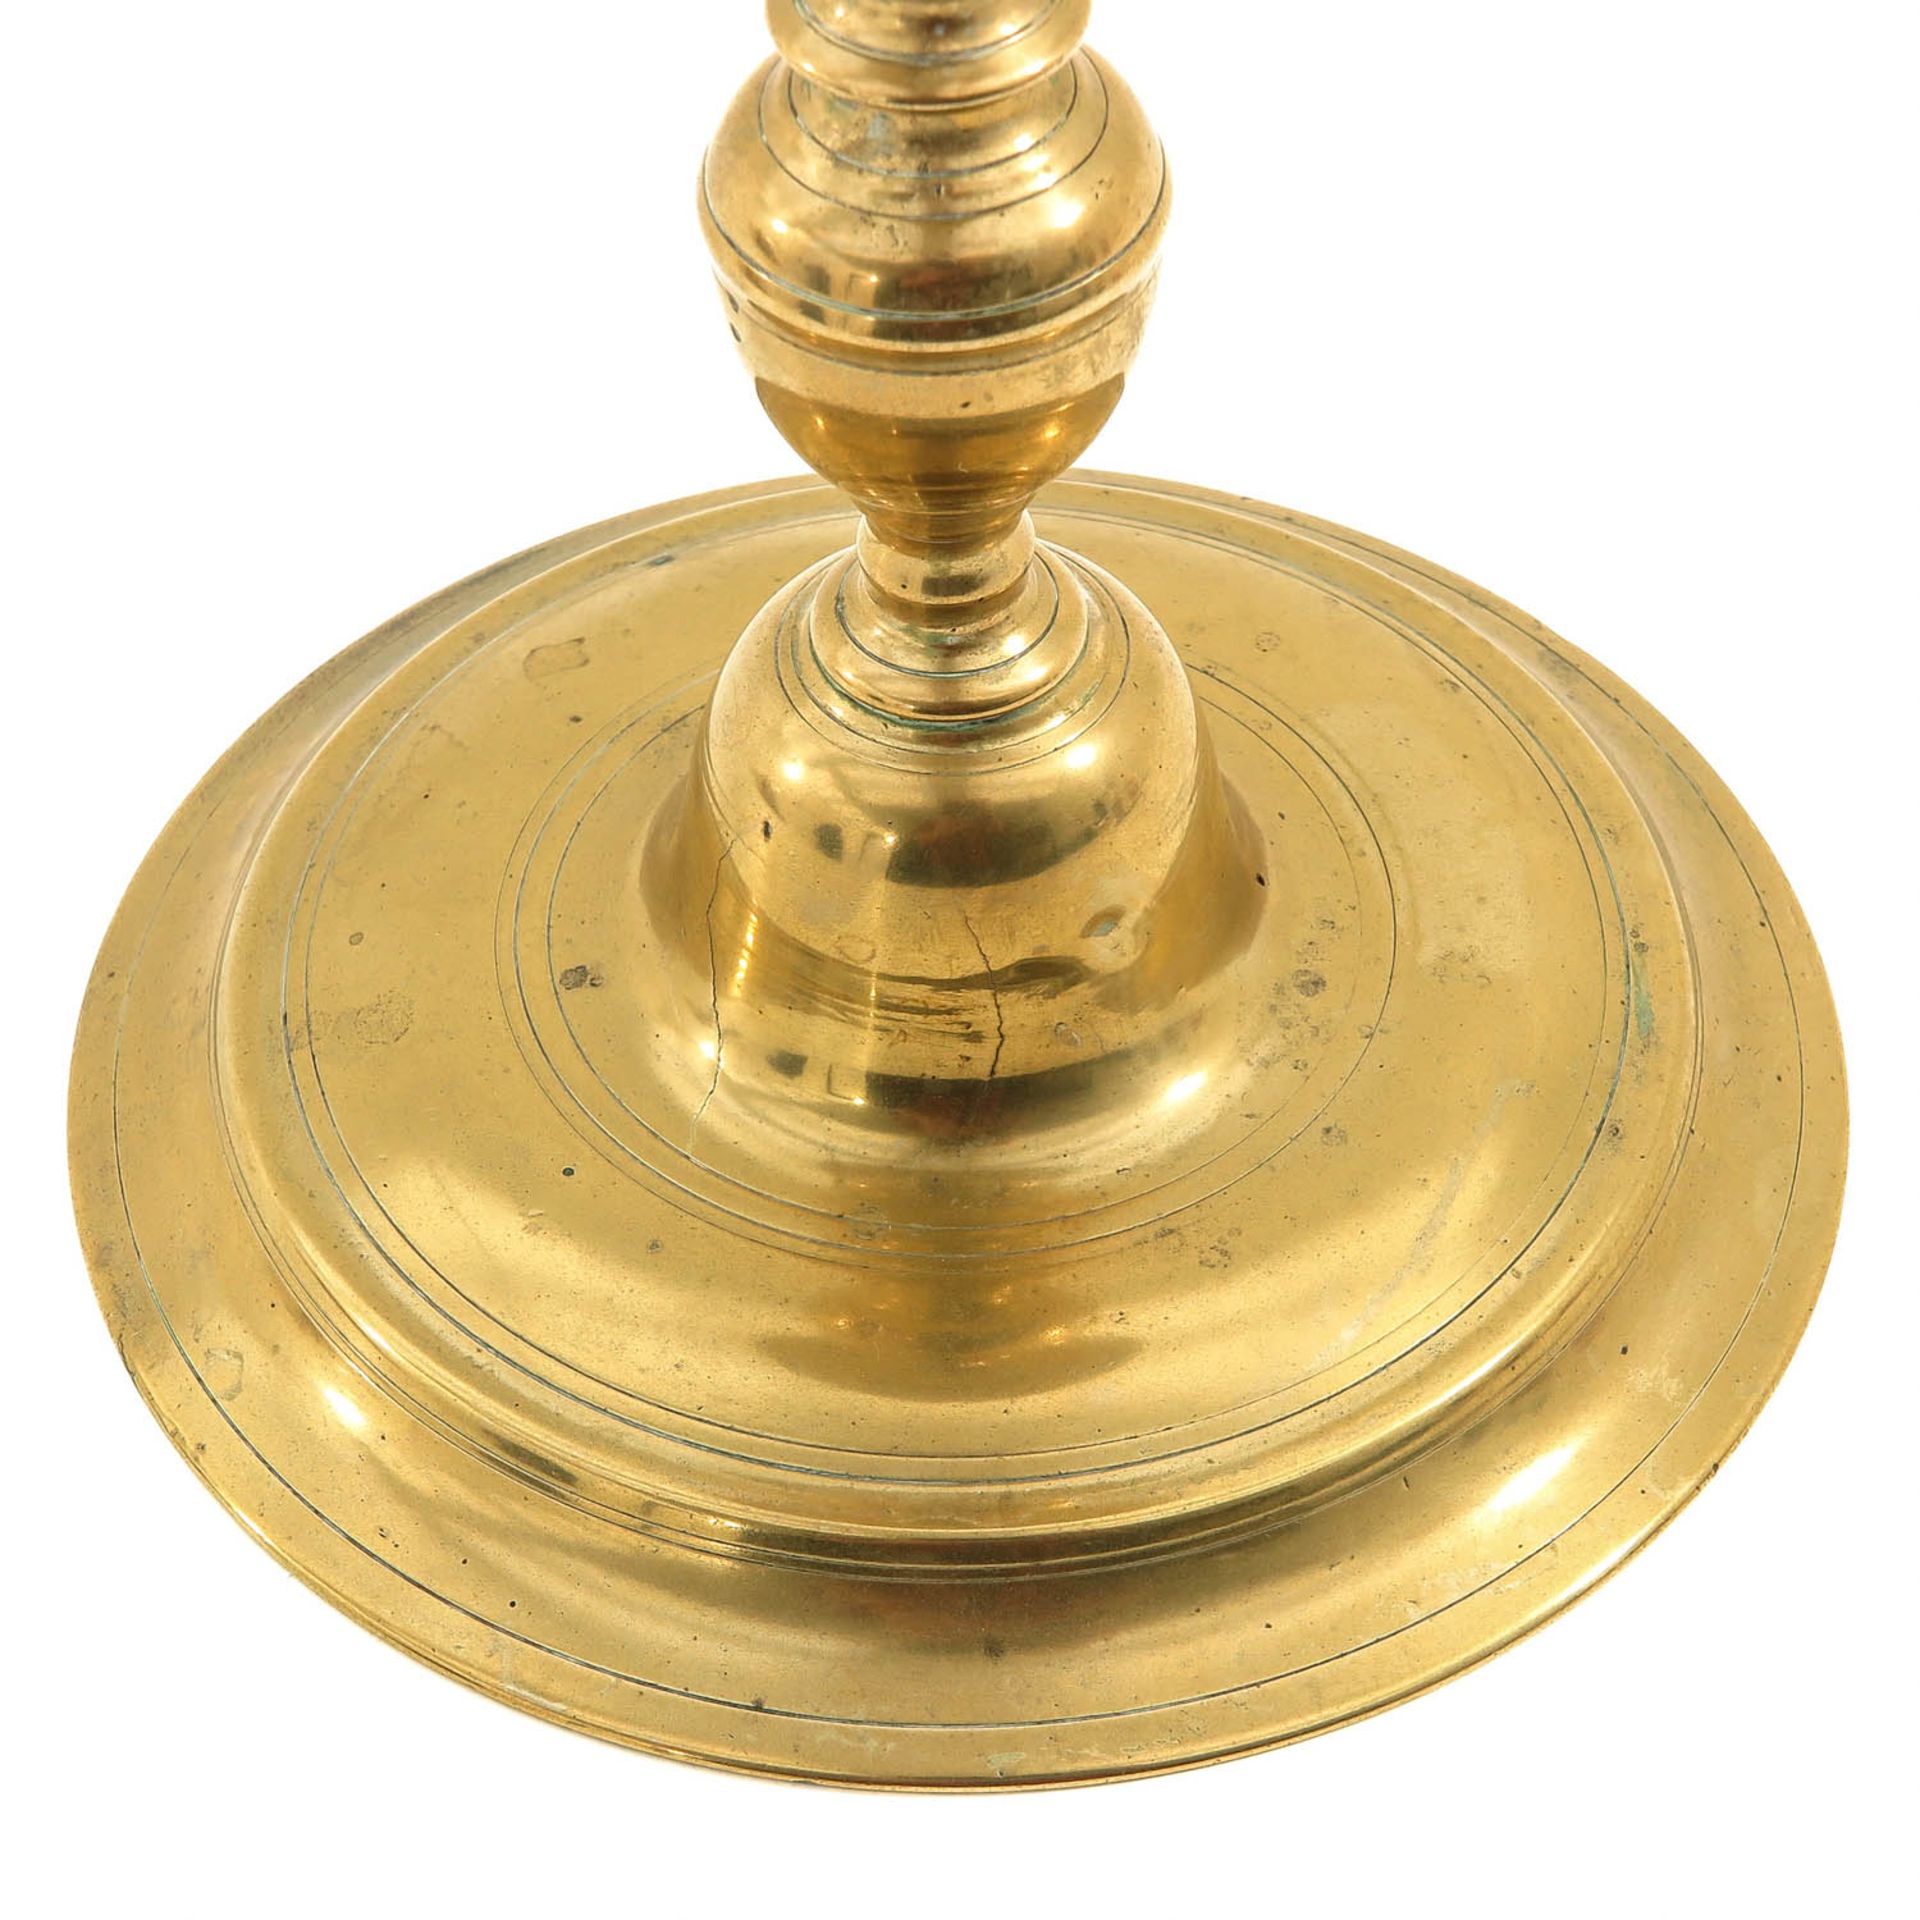 A 17th Century Pen Candlestick - Image 7 of 8